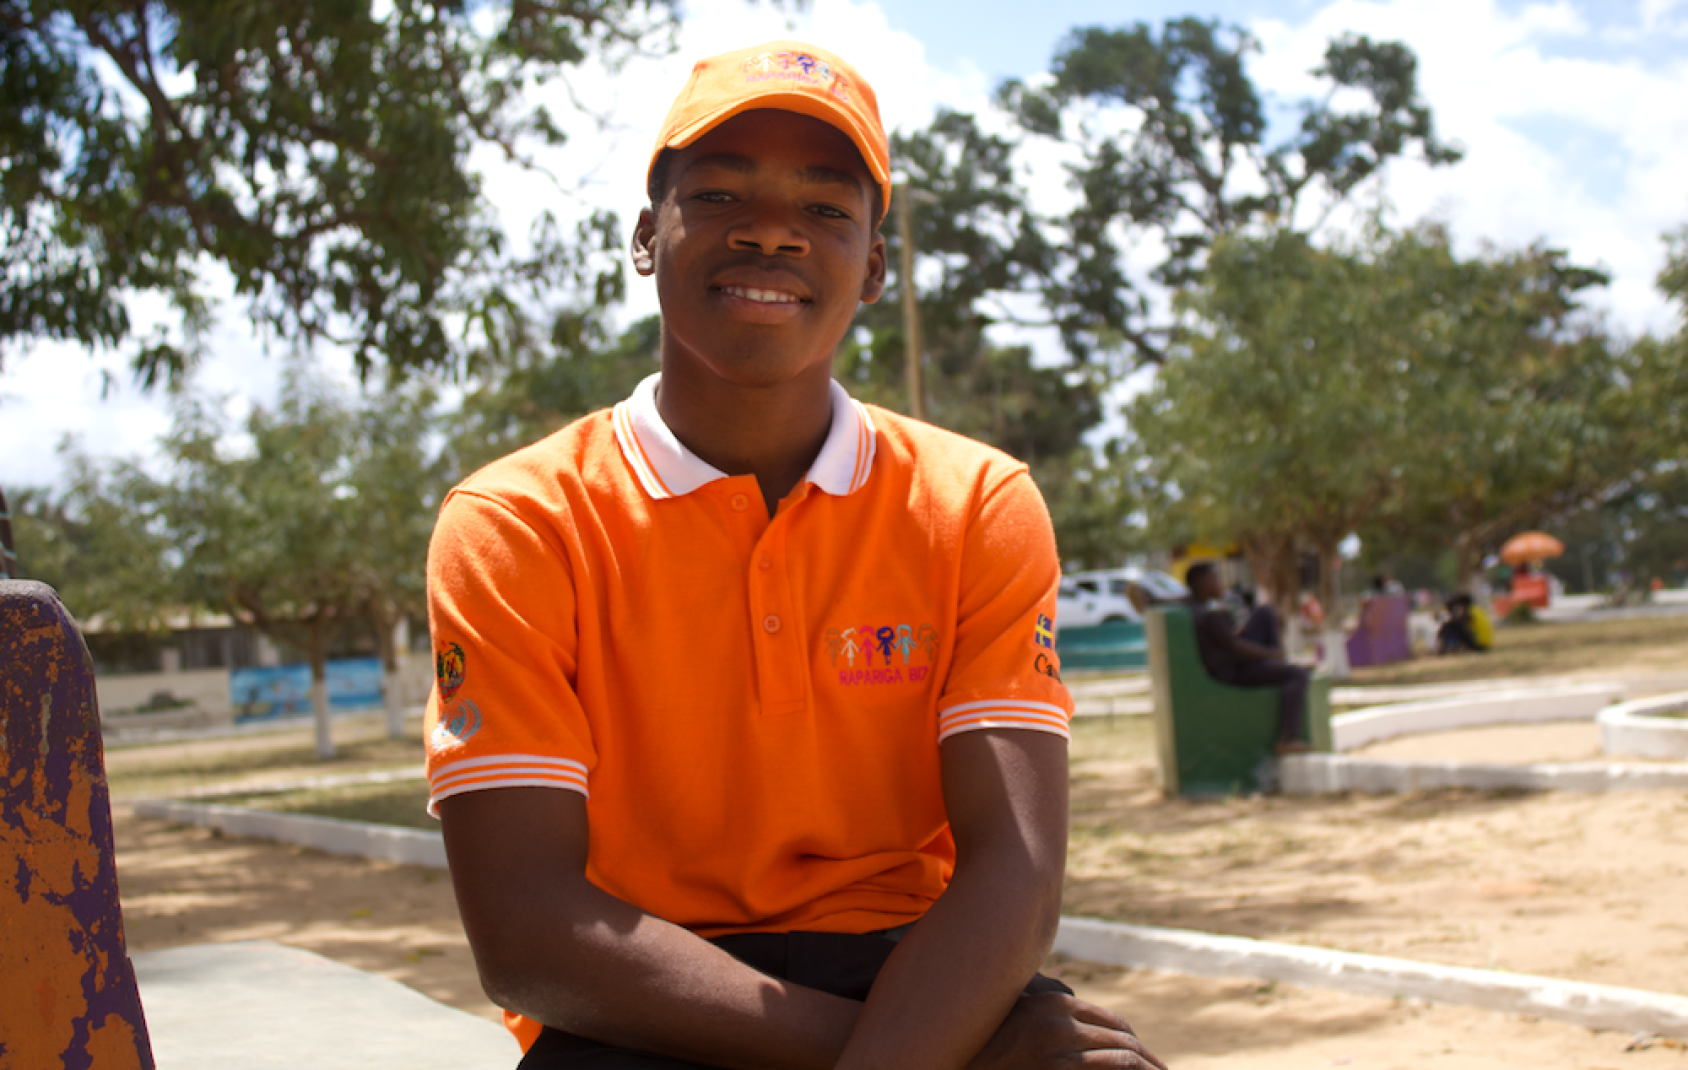 A young Mozambican man in an orange shirt and a cap sits in an open park